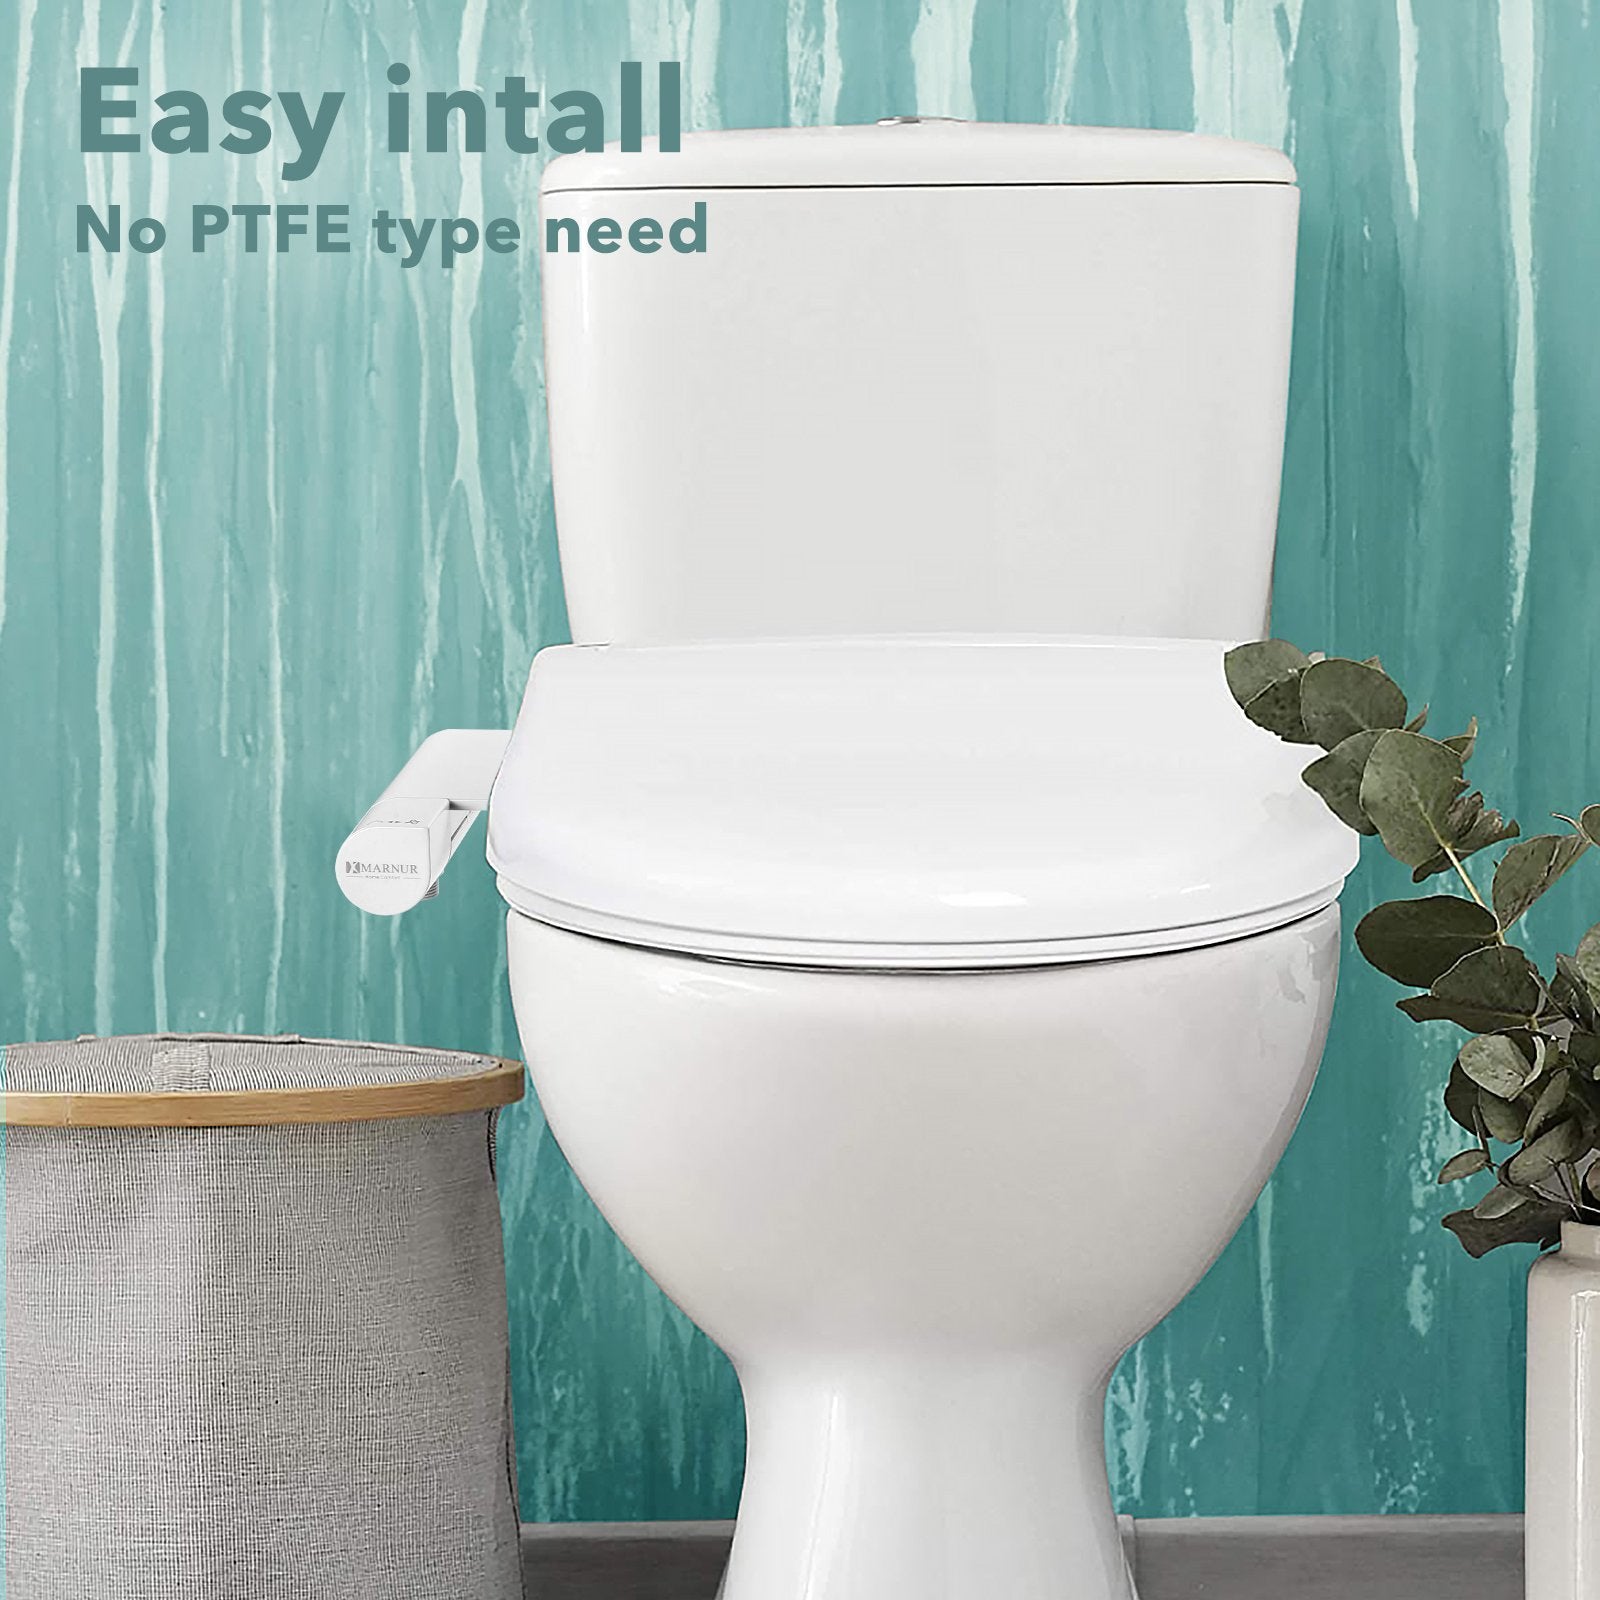 Load image into Gallery viewer, Bidet Toilet Attachment Non-Electric with Fresh Water Spay for Bottom Wash, User-friendly Single Knob and Self-Cleaning Nozzle Available - NAIPO
